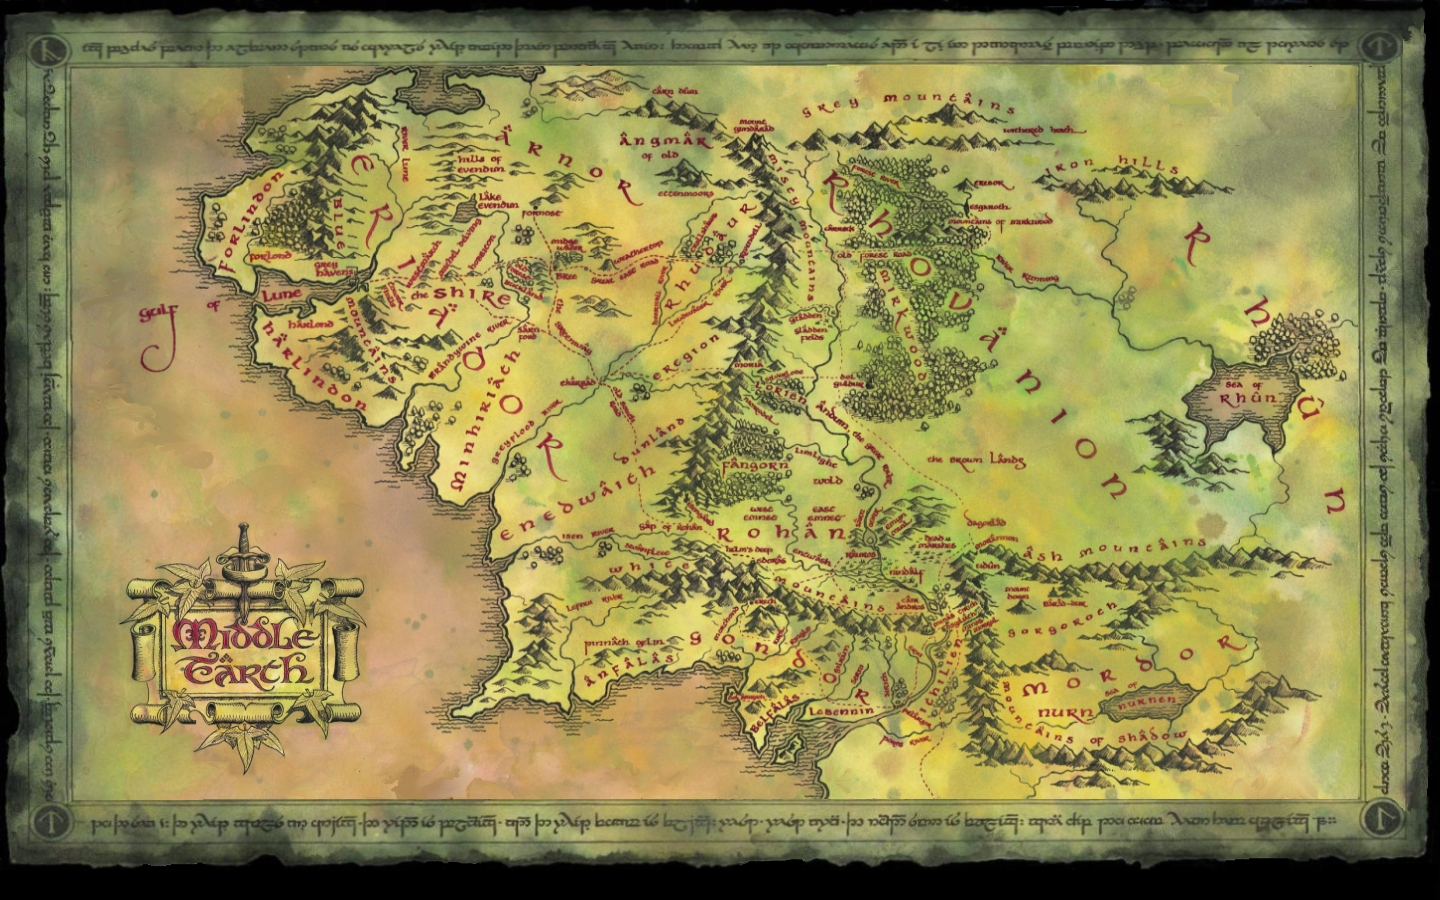 lego lord of the rings map